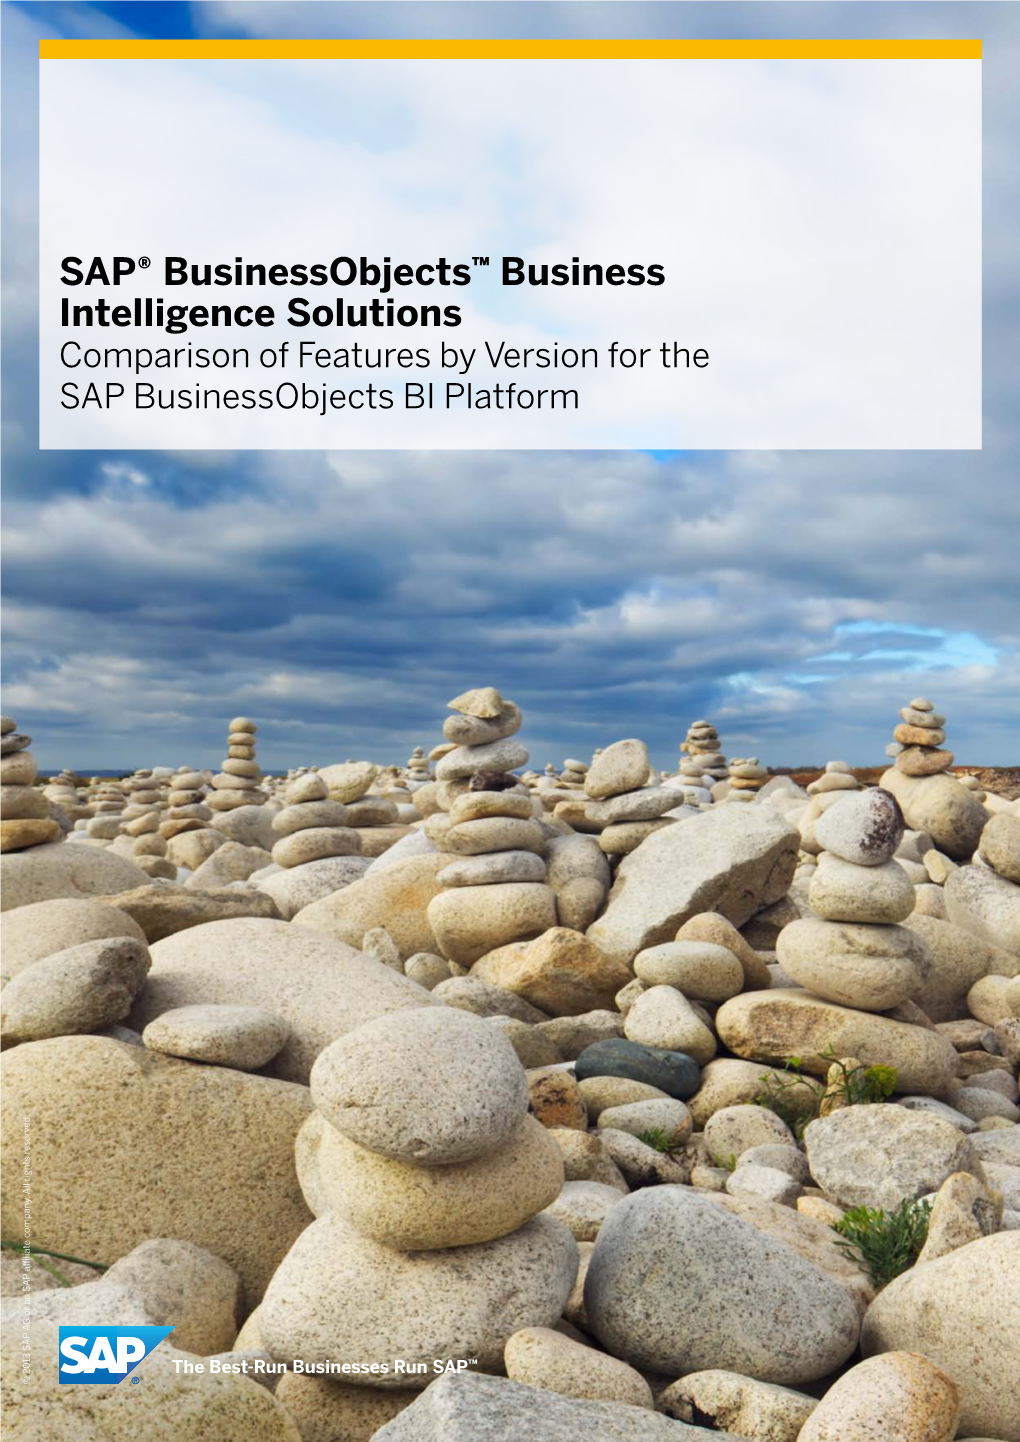 SAP® Businessobjects™ Business Intelligence Solutions